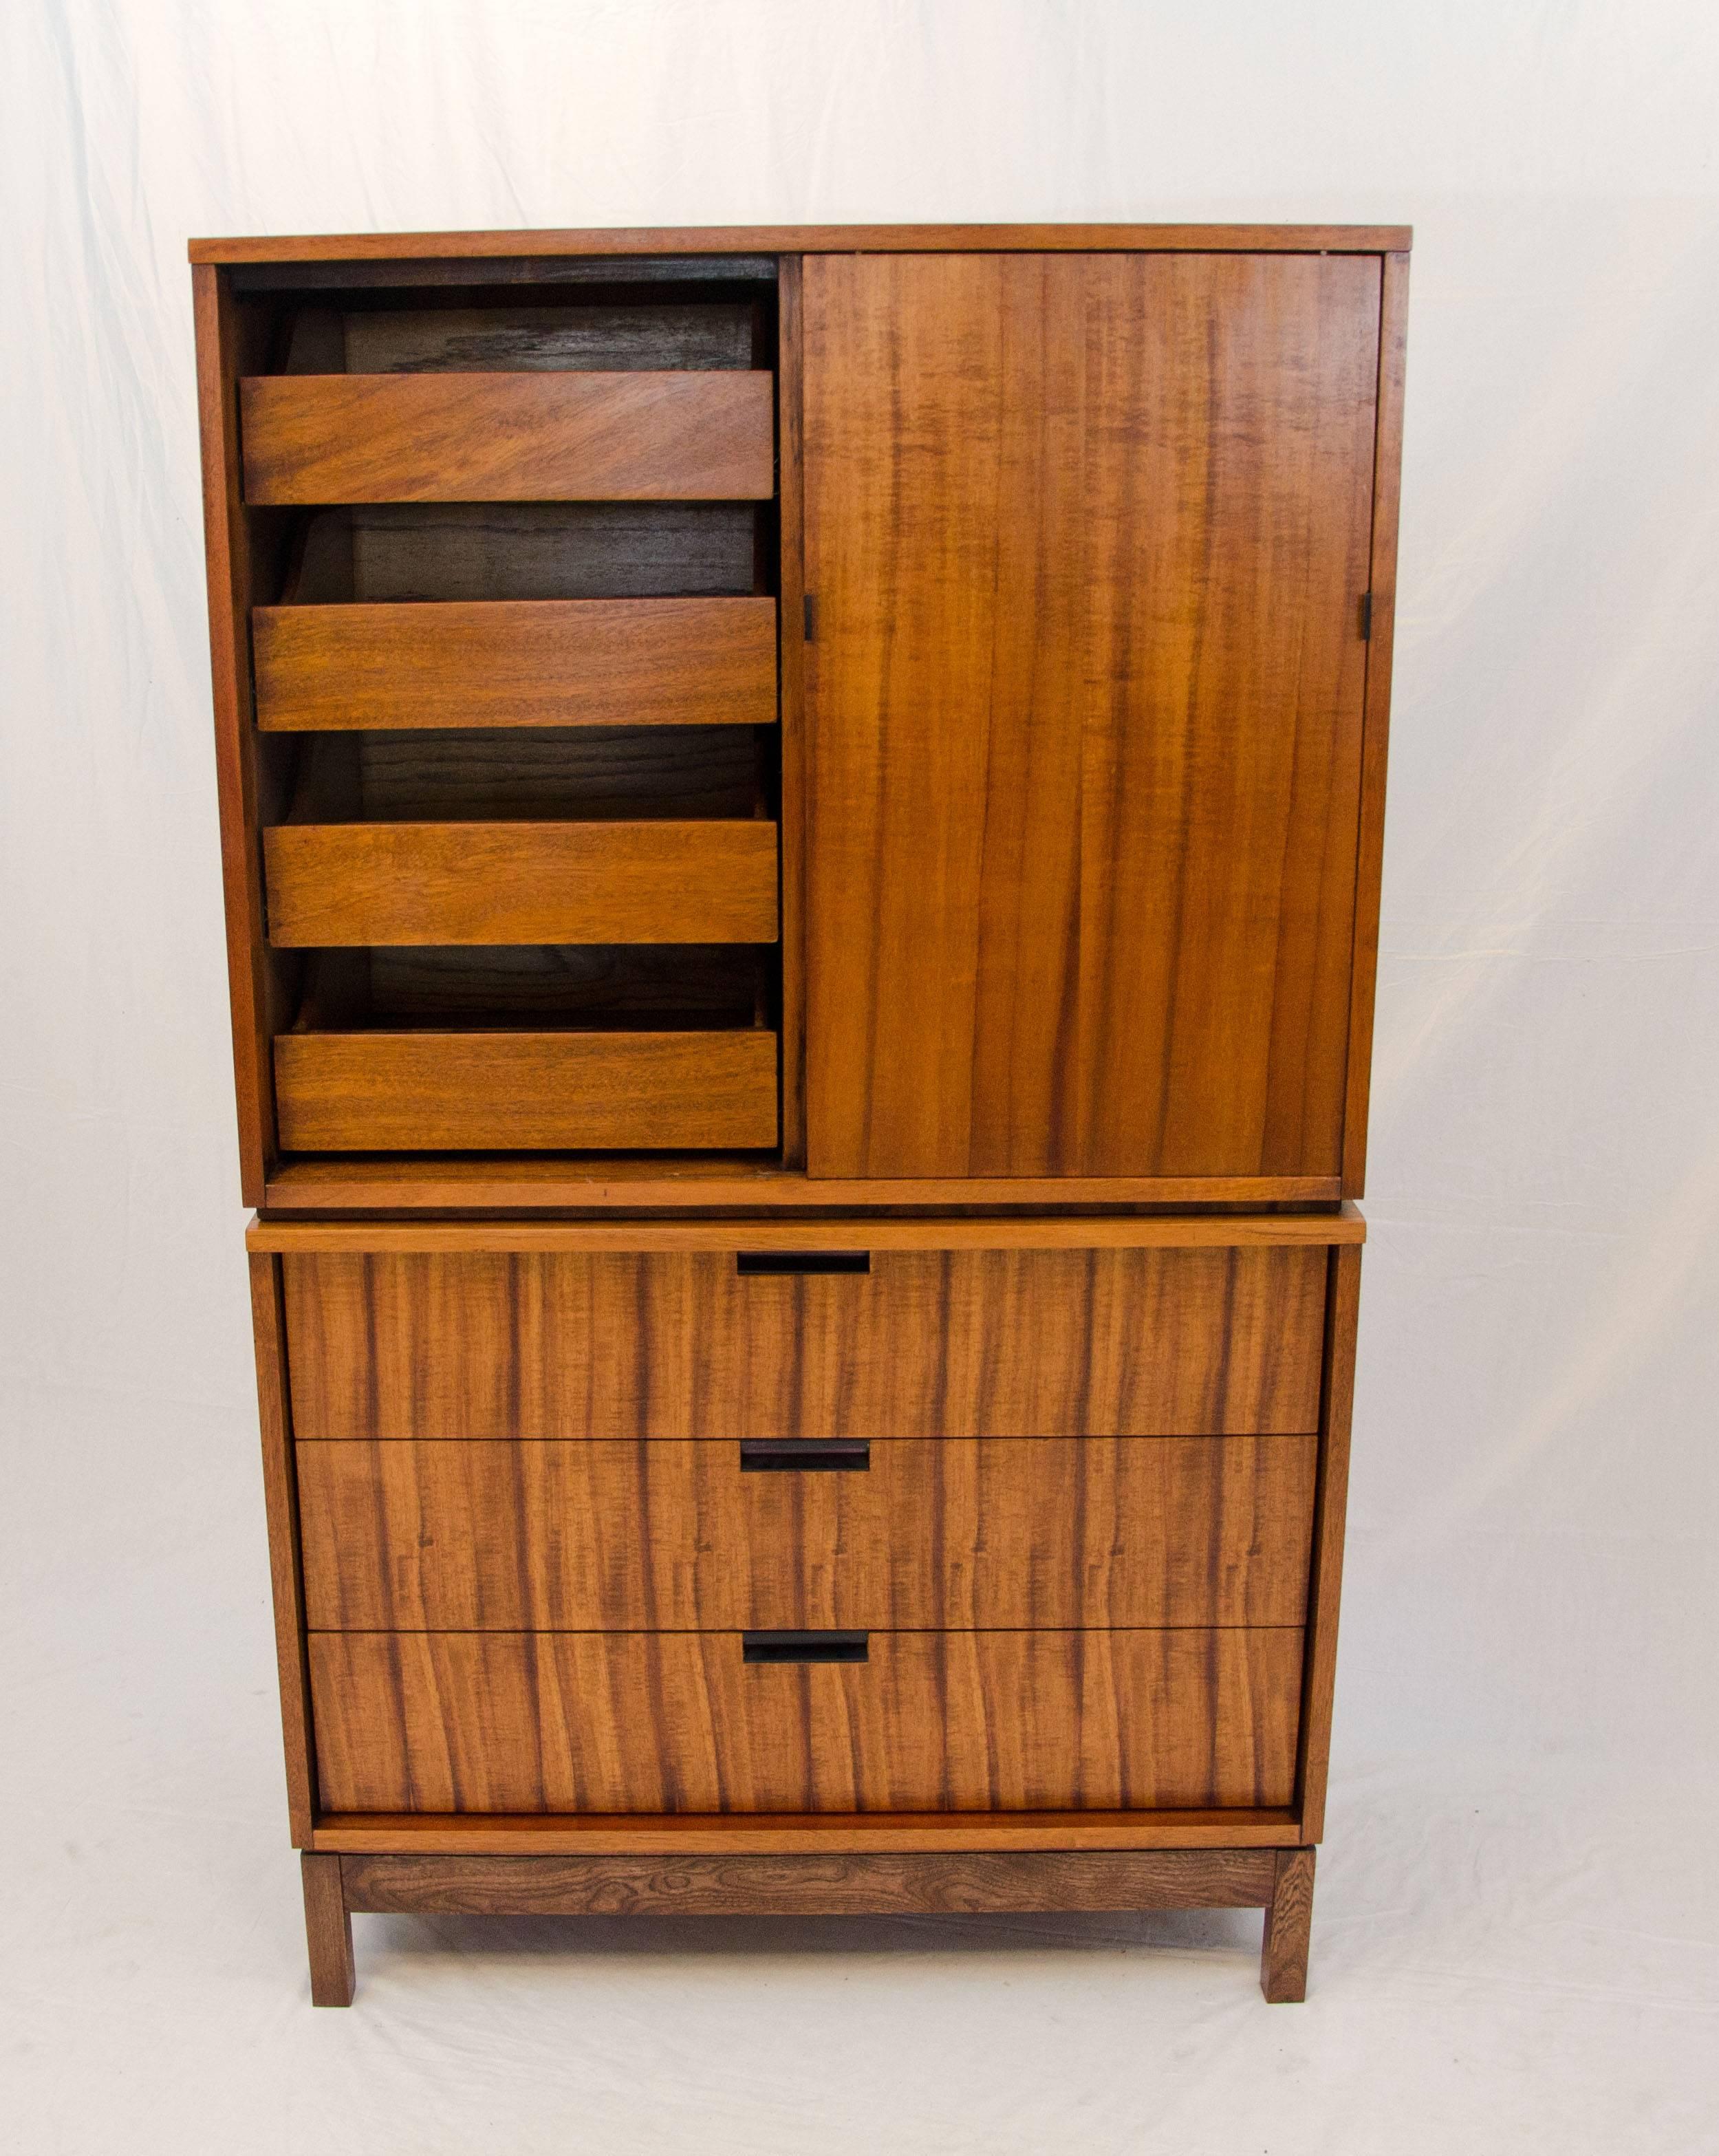 Unusual chest on chest with lots of storage space. Drawer fronts and sliding door display book-matched active grain patterns. Four interior drawers are also accessible by sliding door to the right. All drawers slide in and out easily. Drawers have